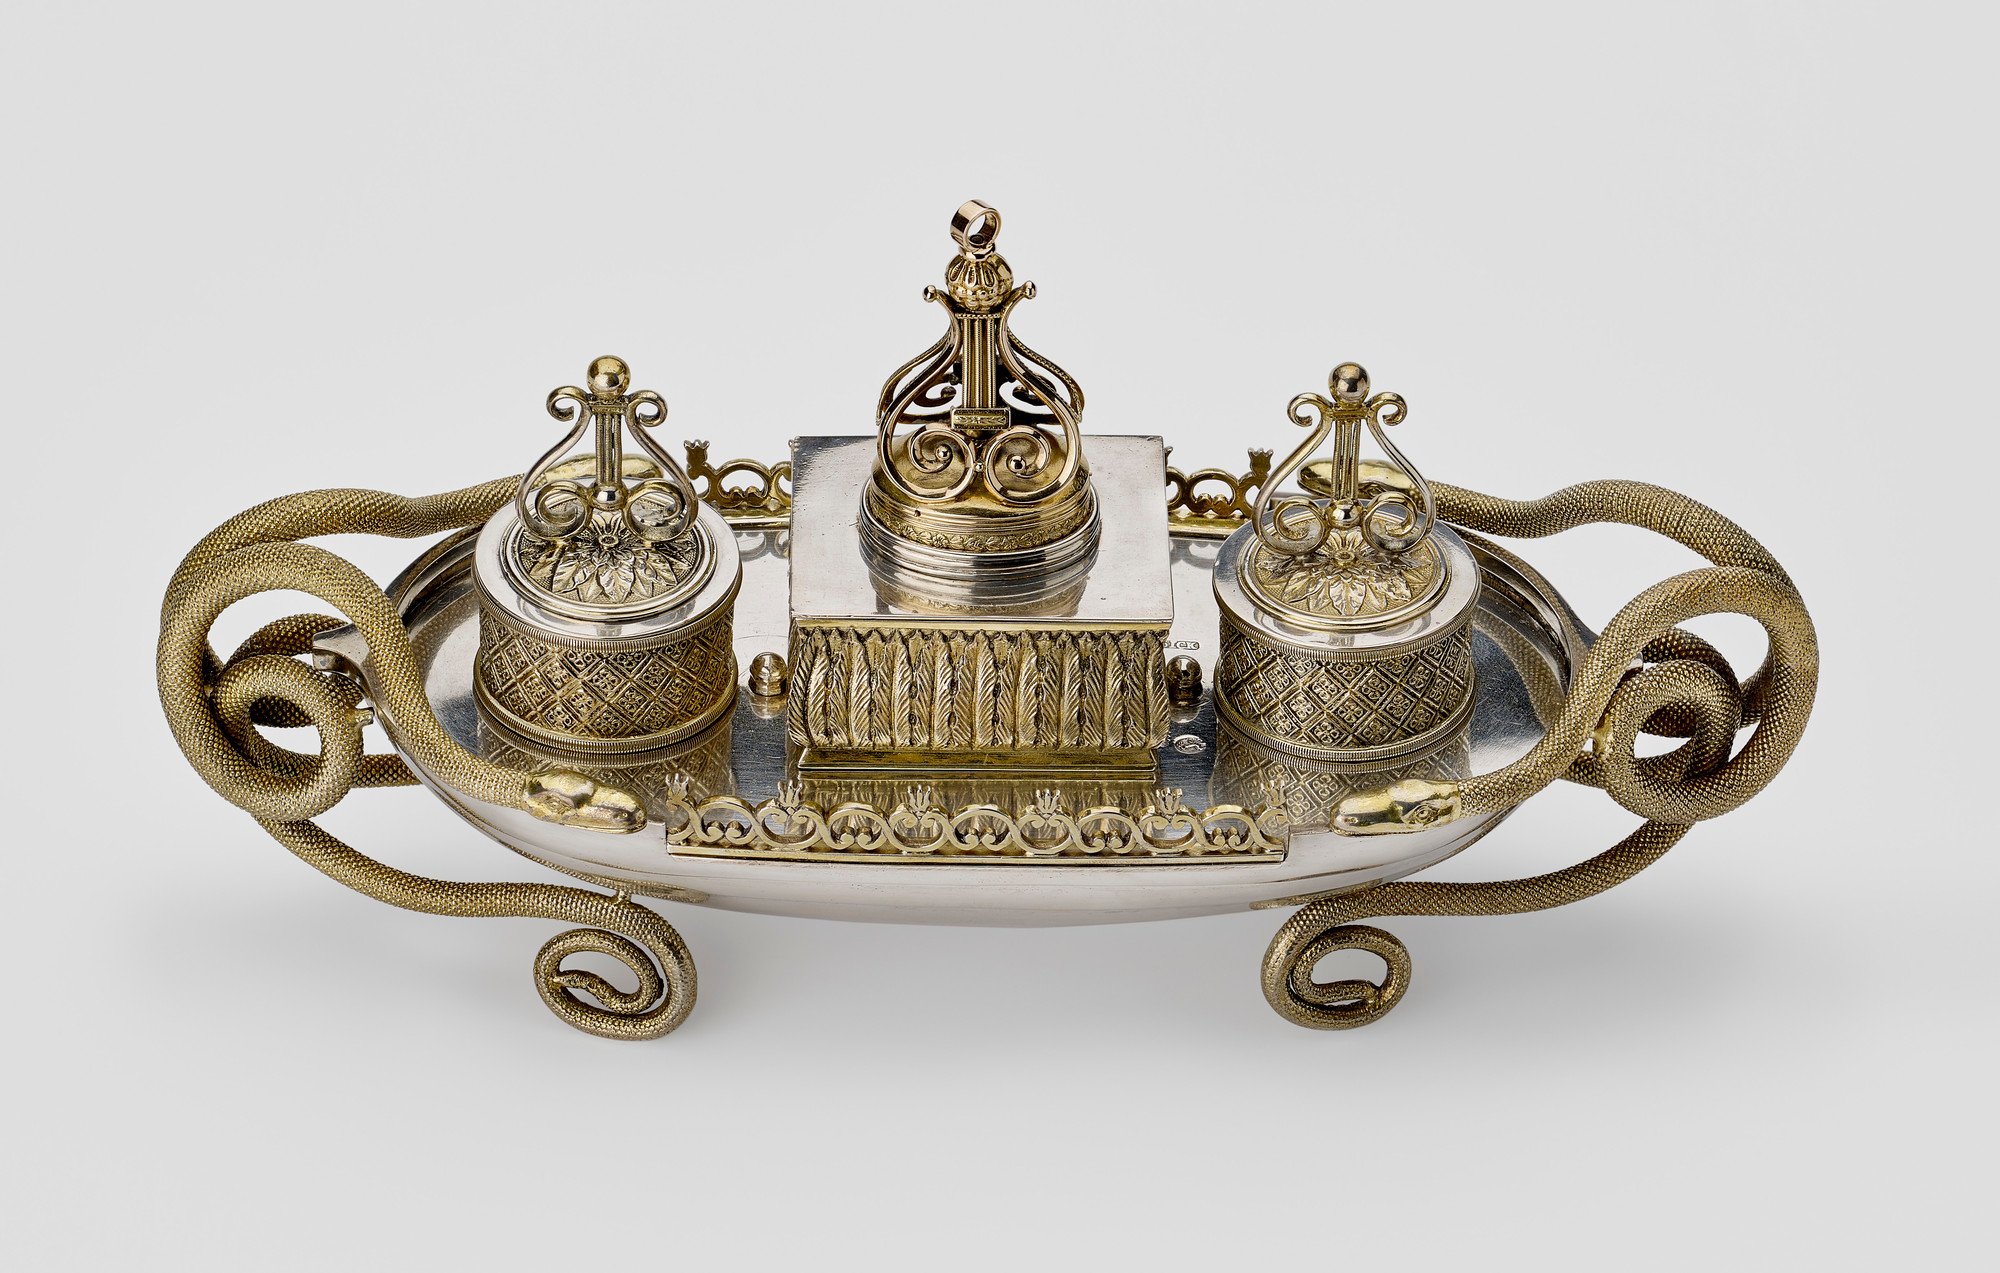 Boat shaped inkstand viewed from the top